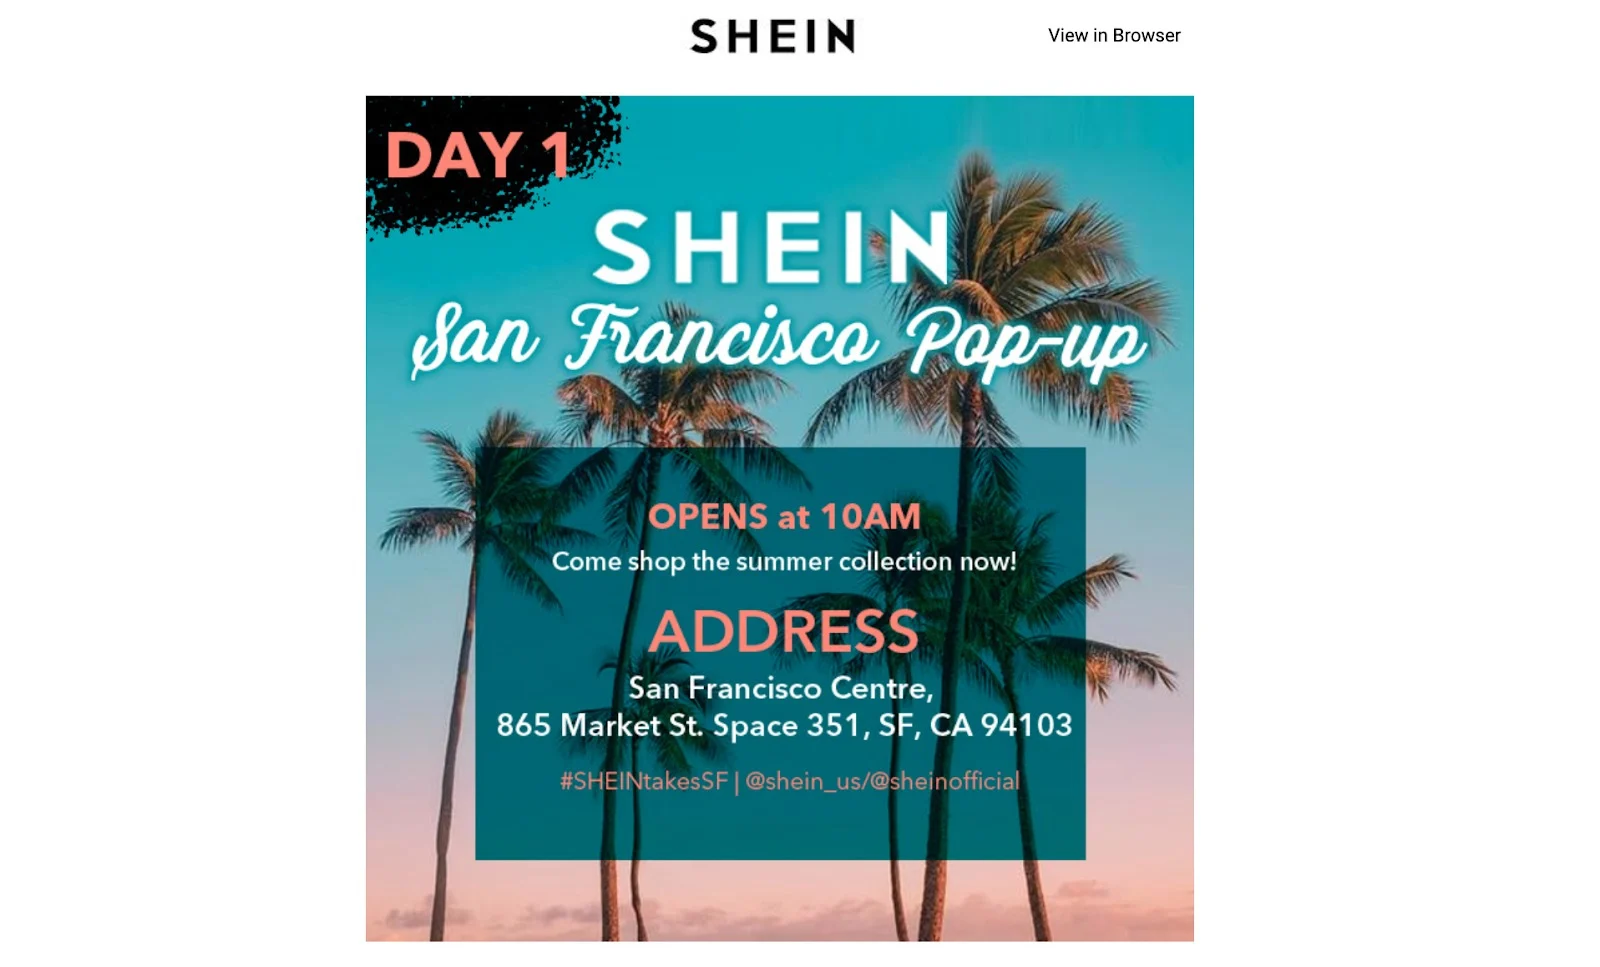 Pop-Up Exp by Macerich: Start Your Own Pop-up Shop